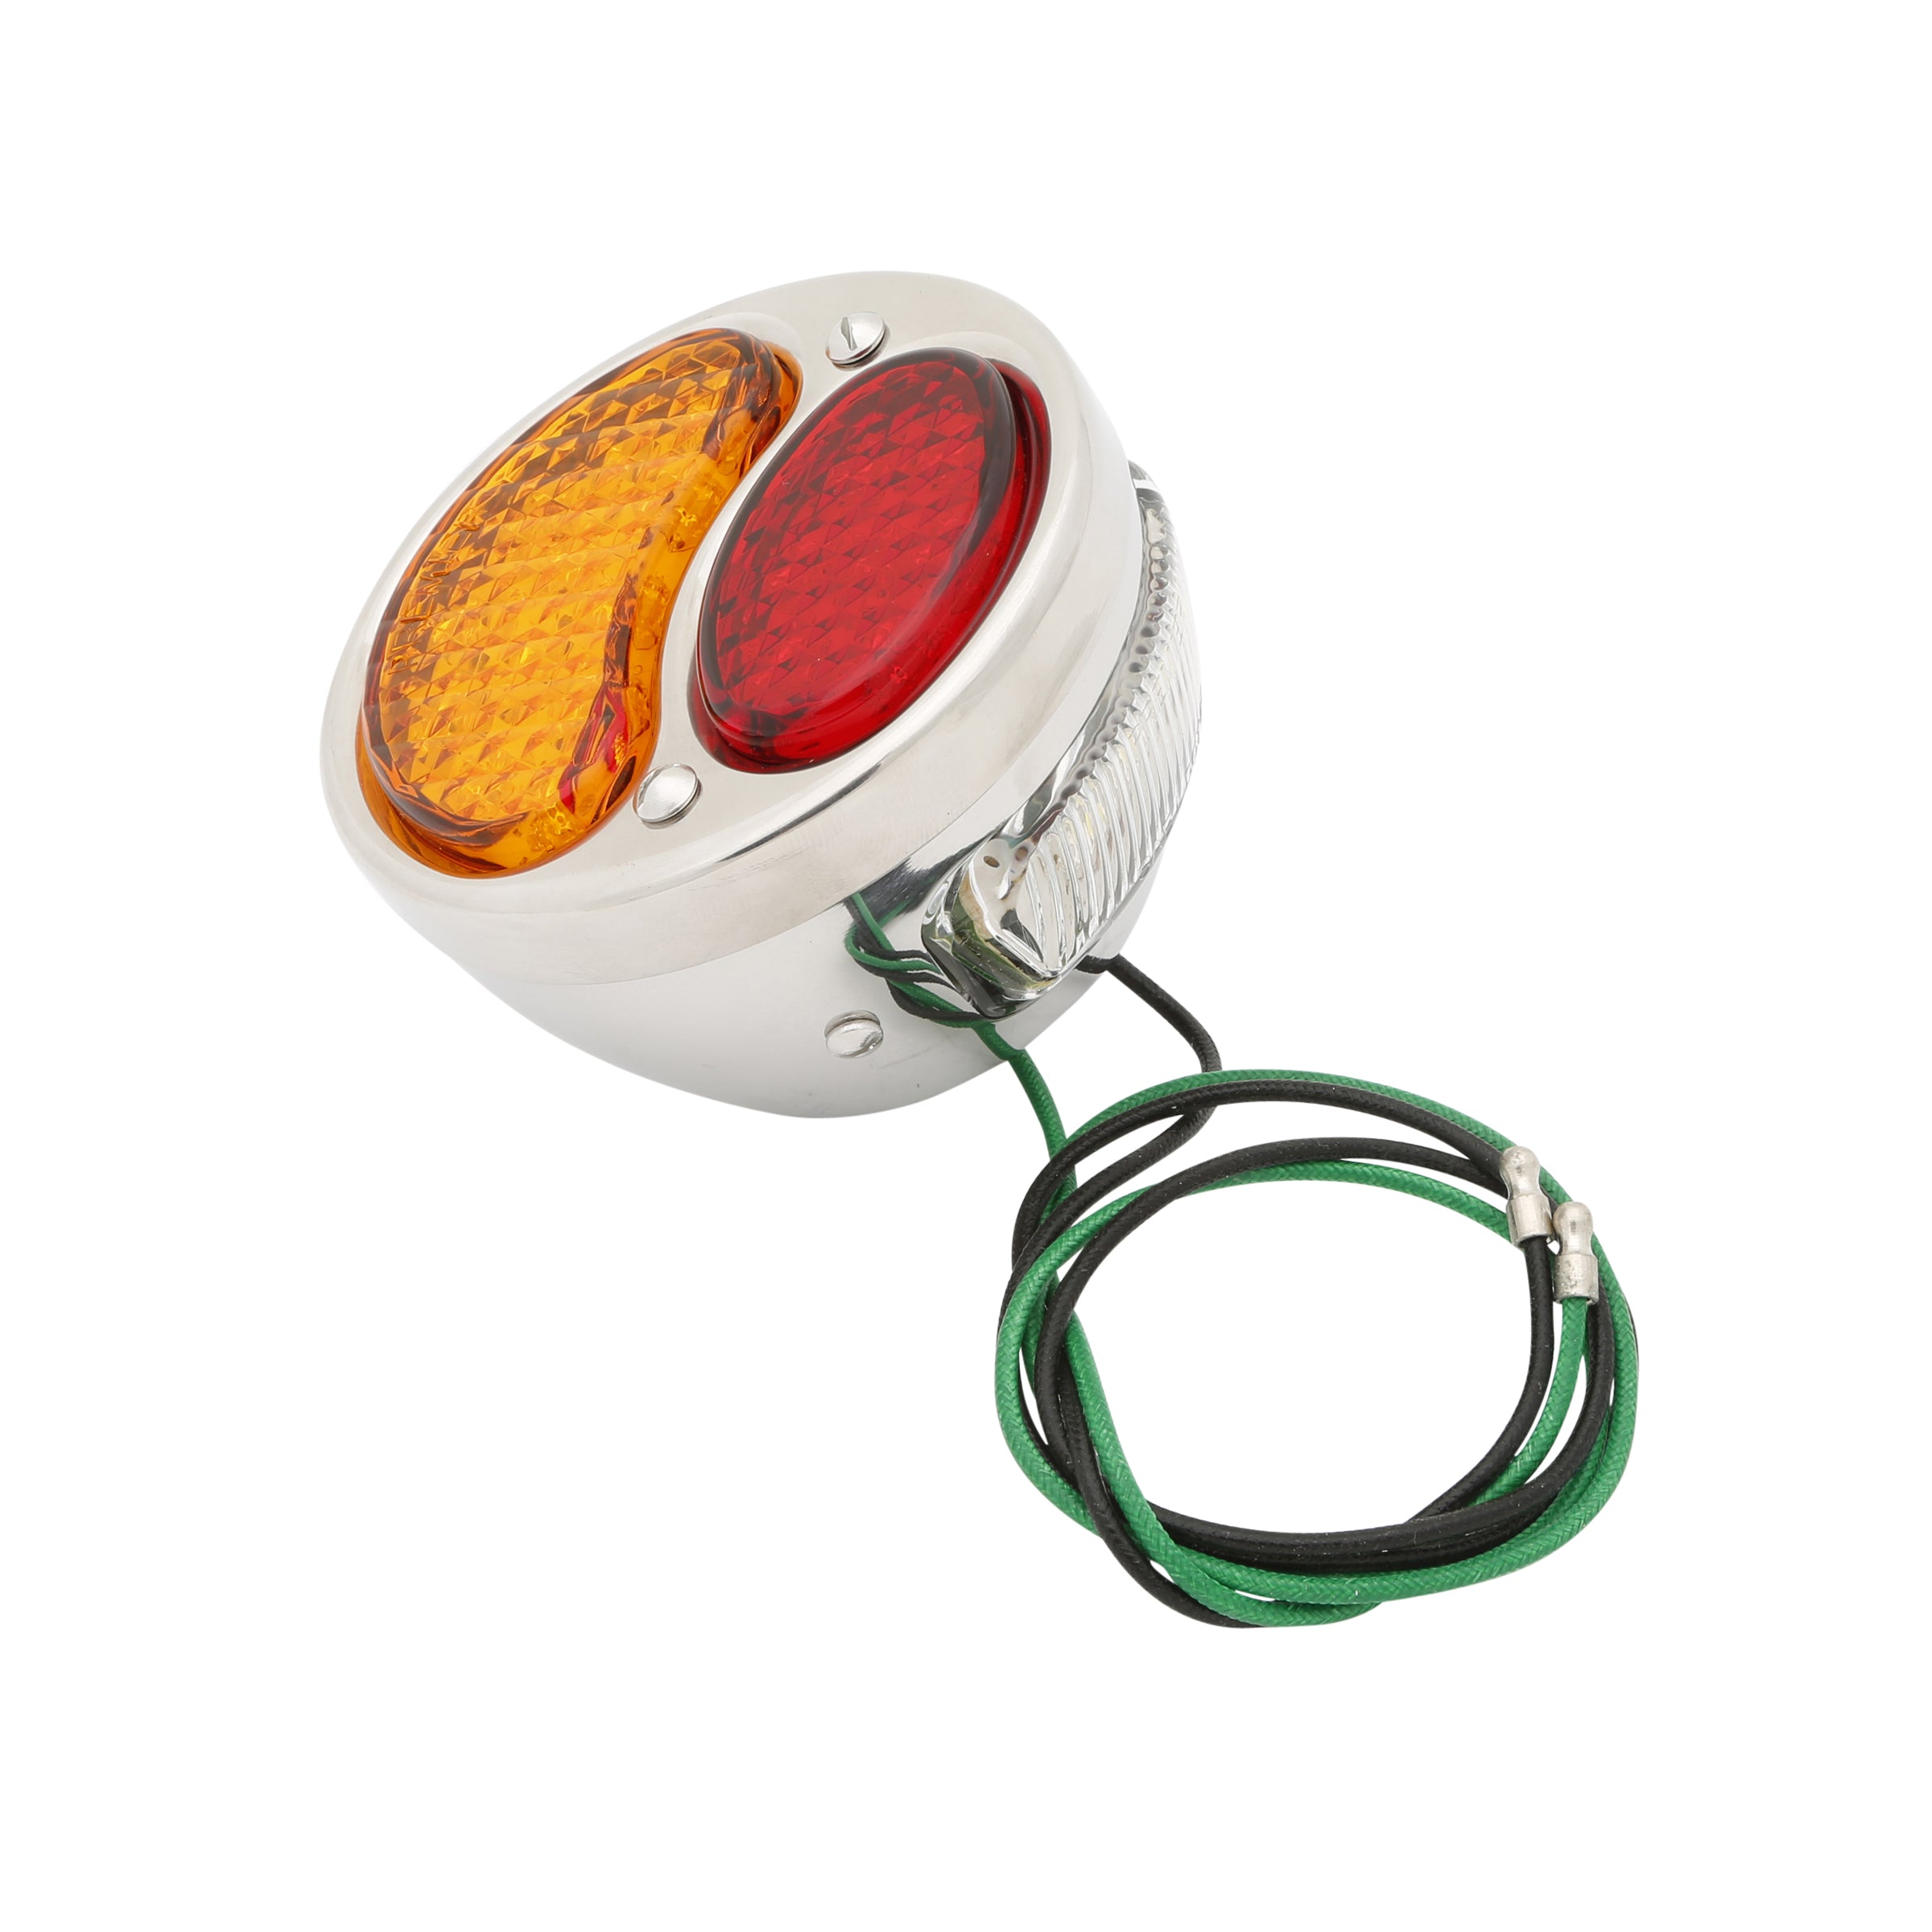 Taillight (LED 6 Volt Red/Amber Lens) • 1928-31 Model A Ford Stainless Steel Left